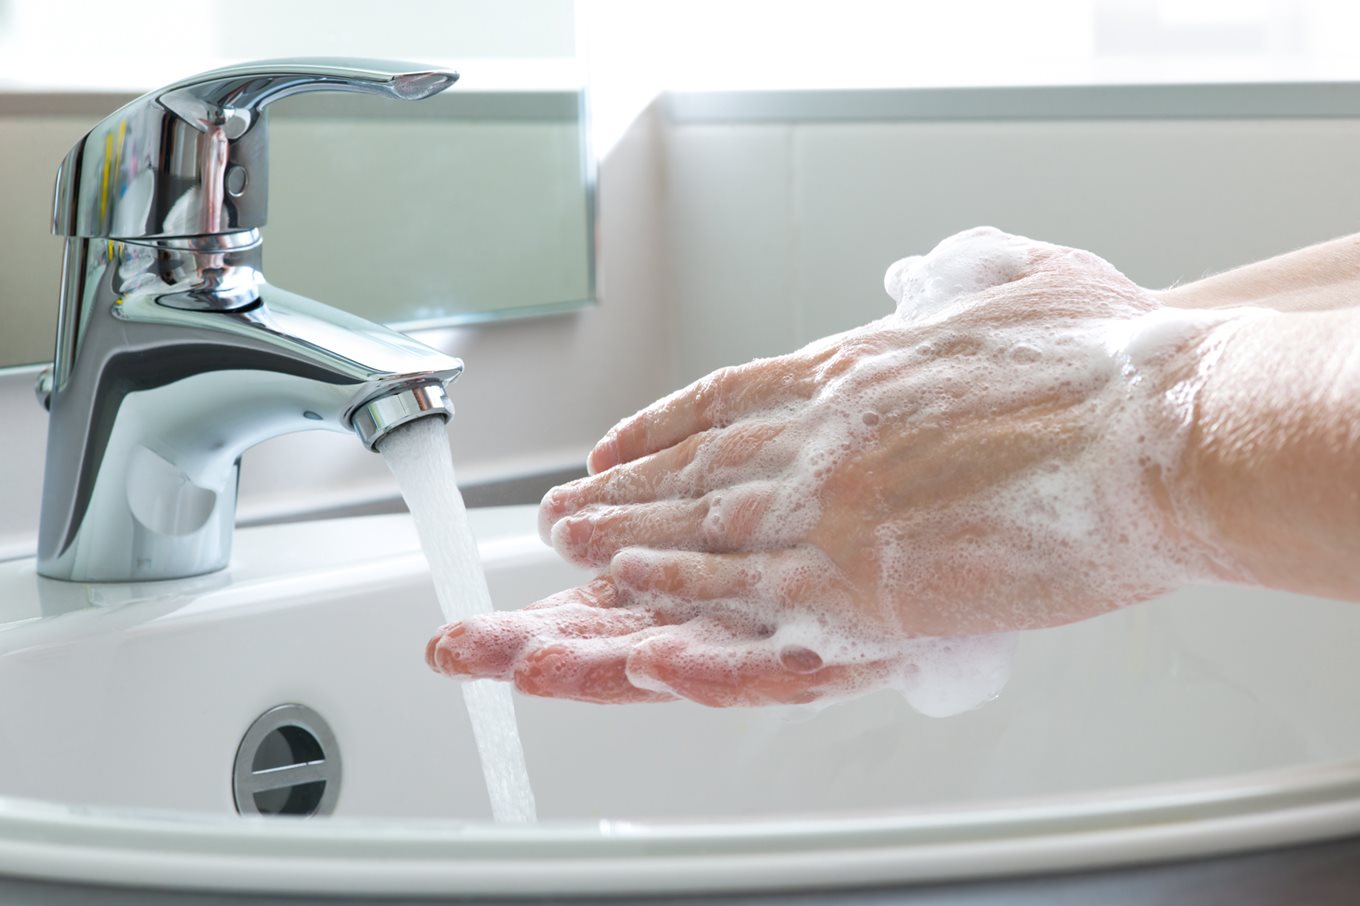 Do people wash their hands after using the bathroom?